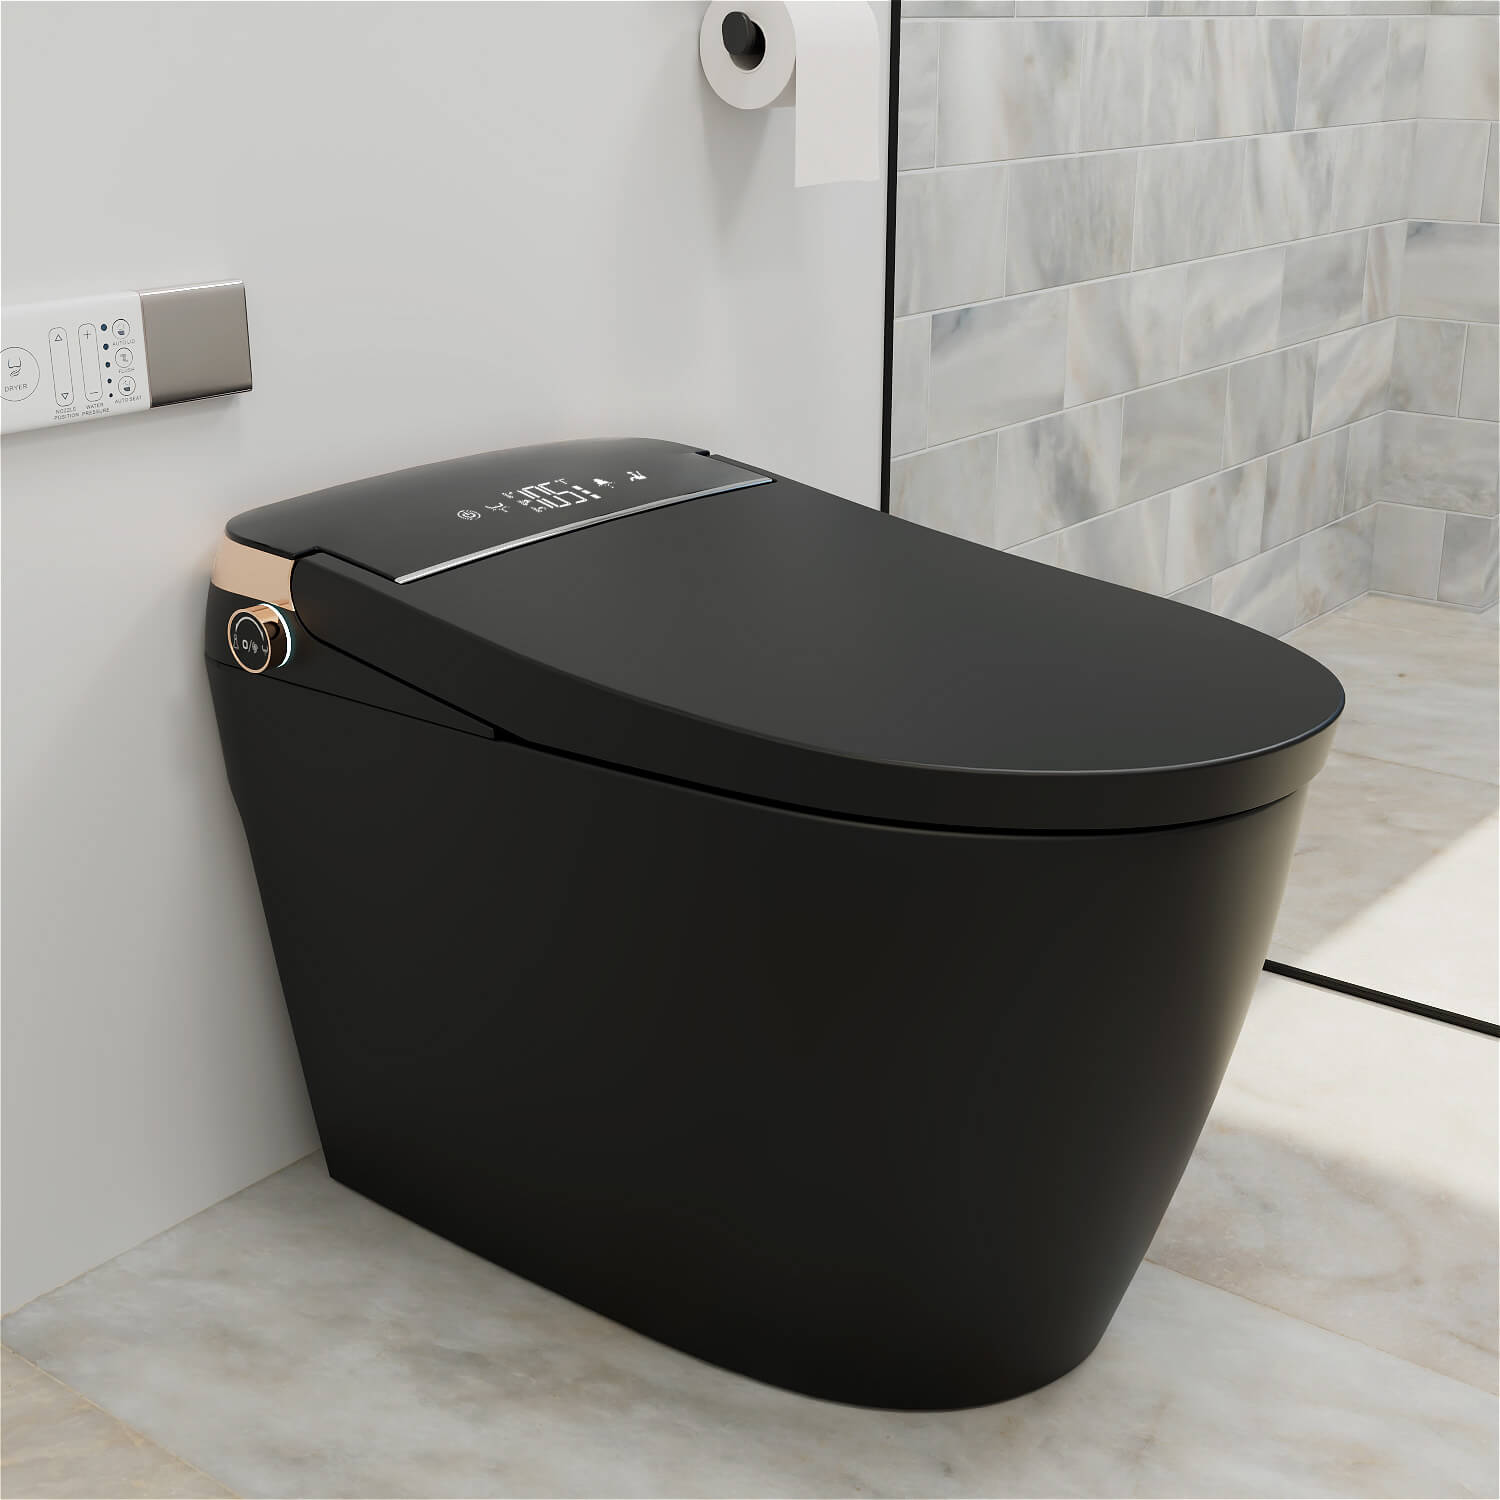 One Piece Smart Toilet with Bidet Built in, LED Night Light, Heated Seat, Warm Water